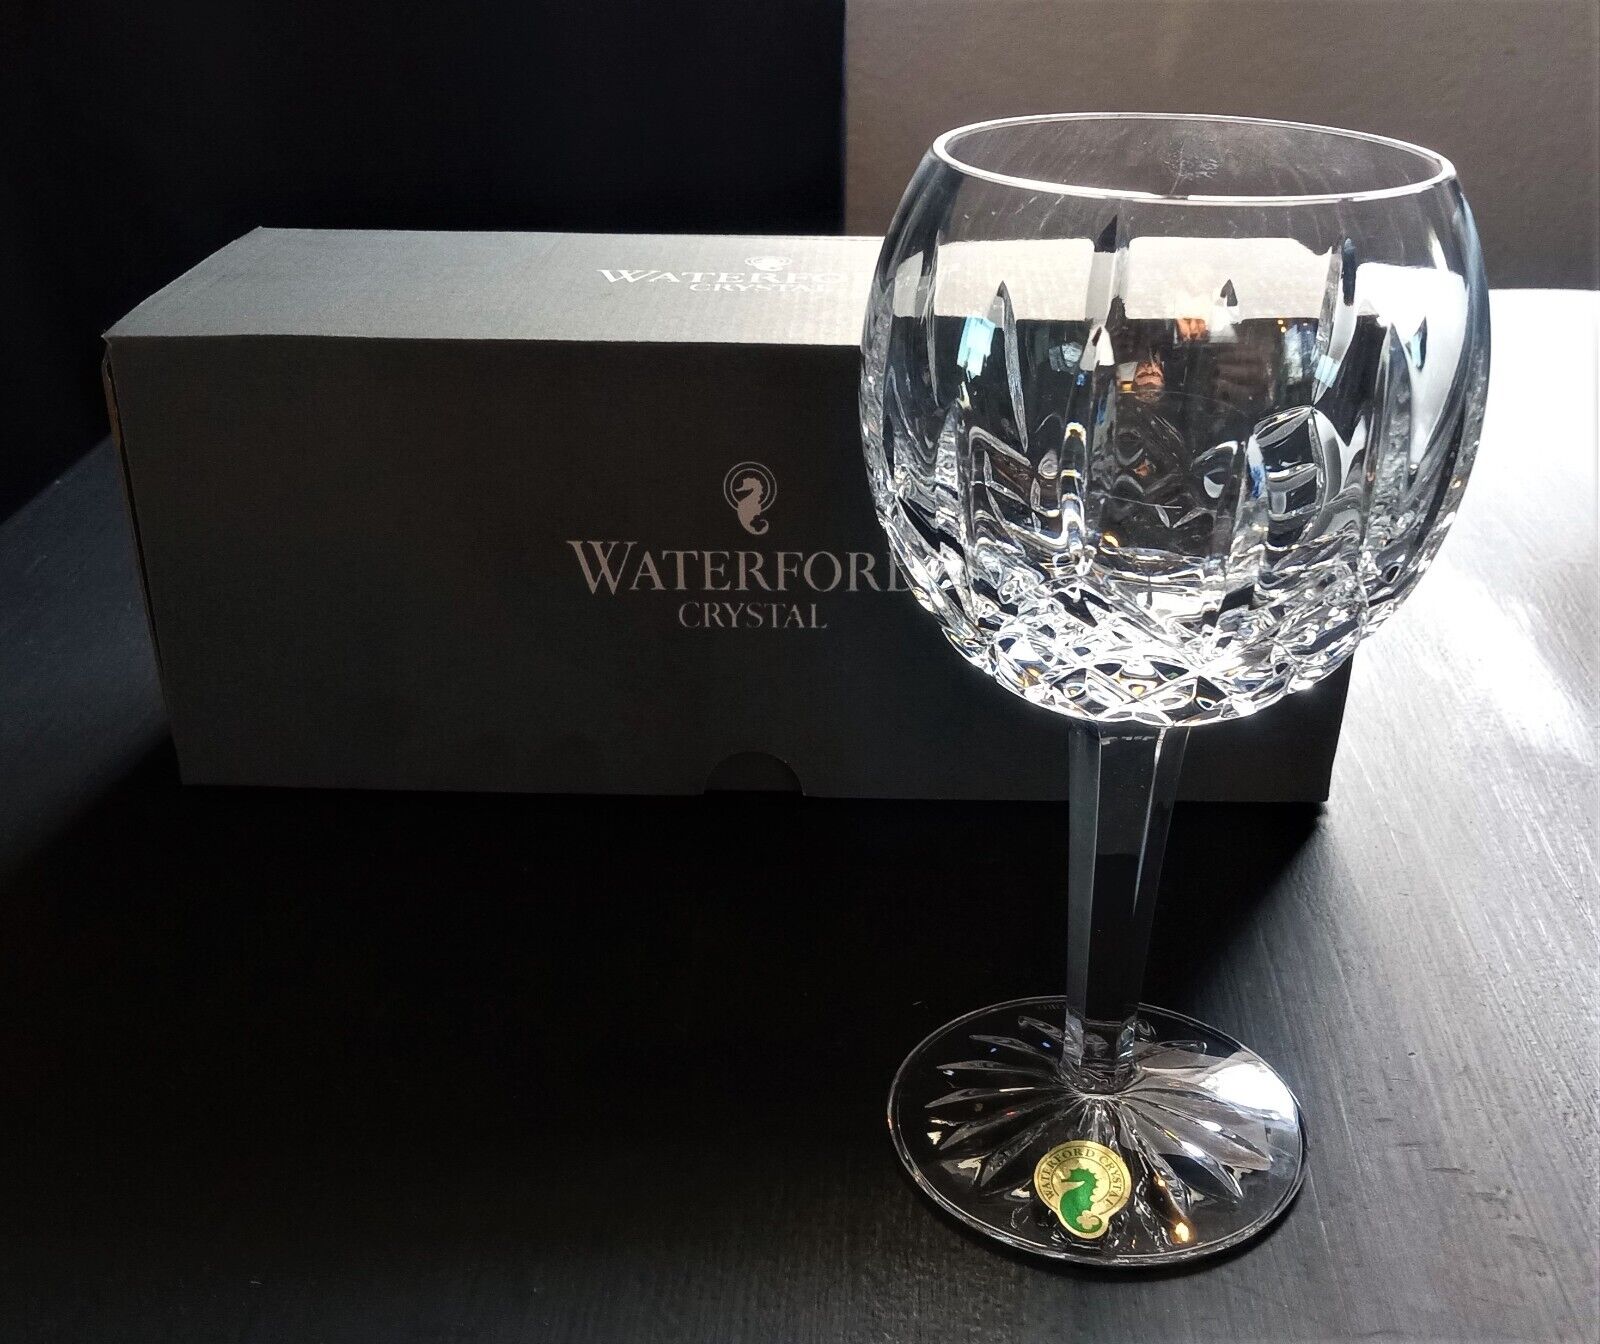 Waterford Crystal Lismore Balloon Wine Glass - NEW IN BOX